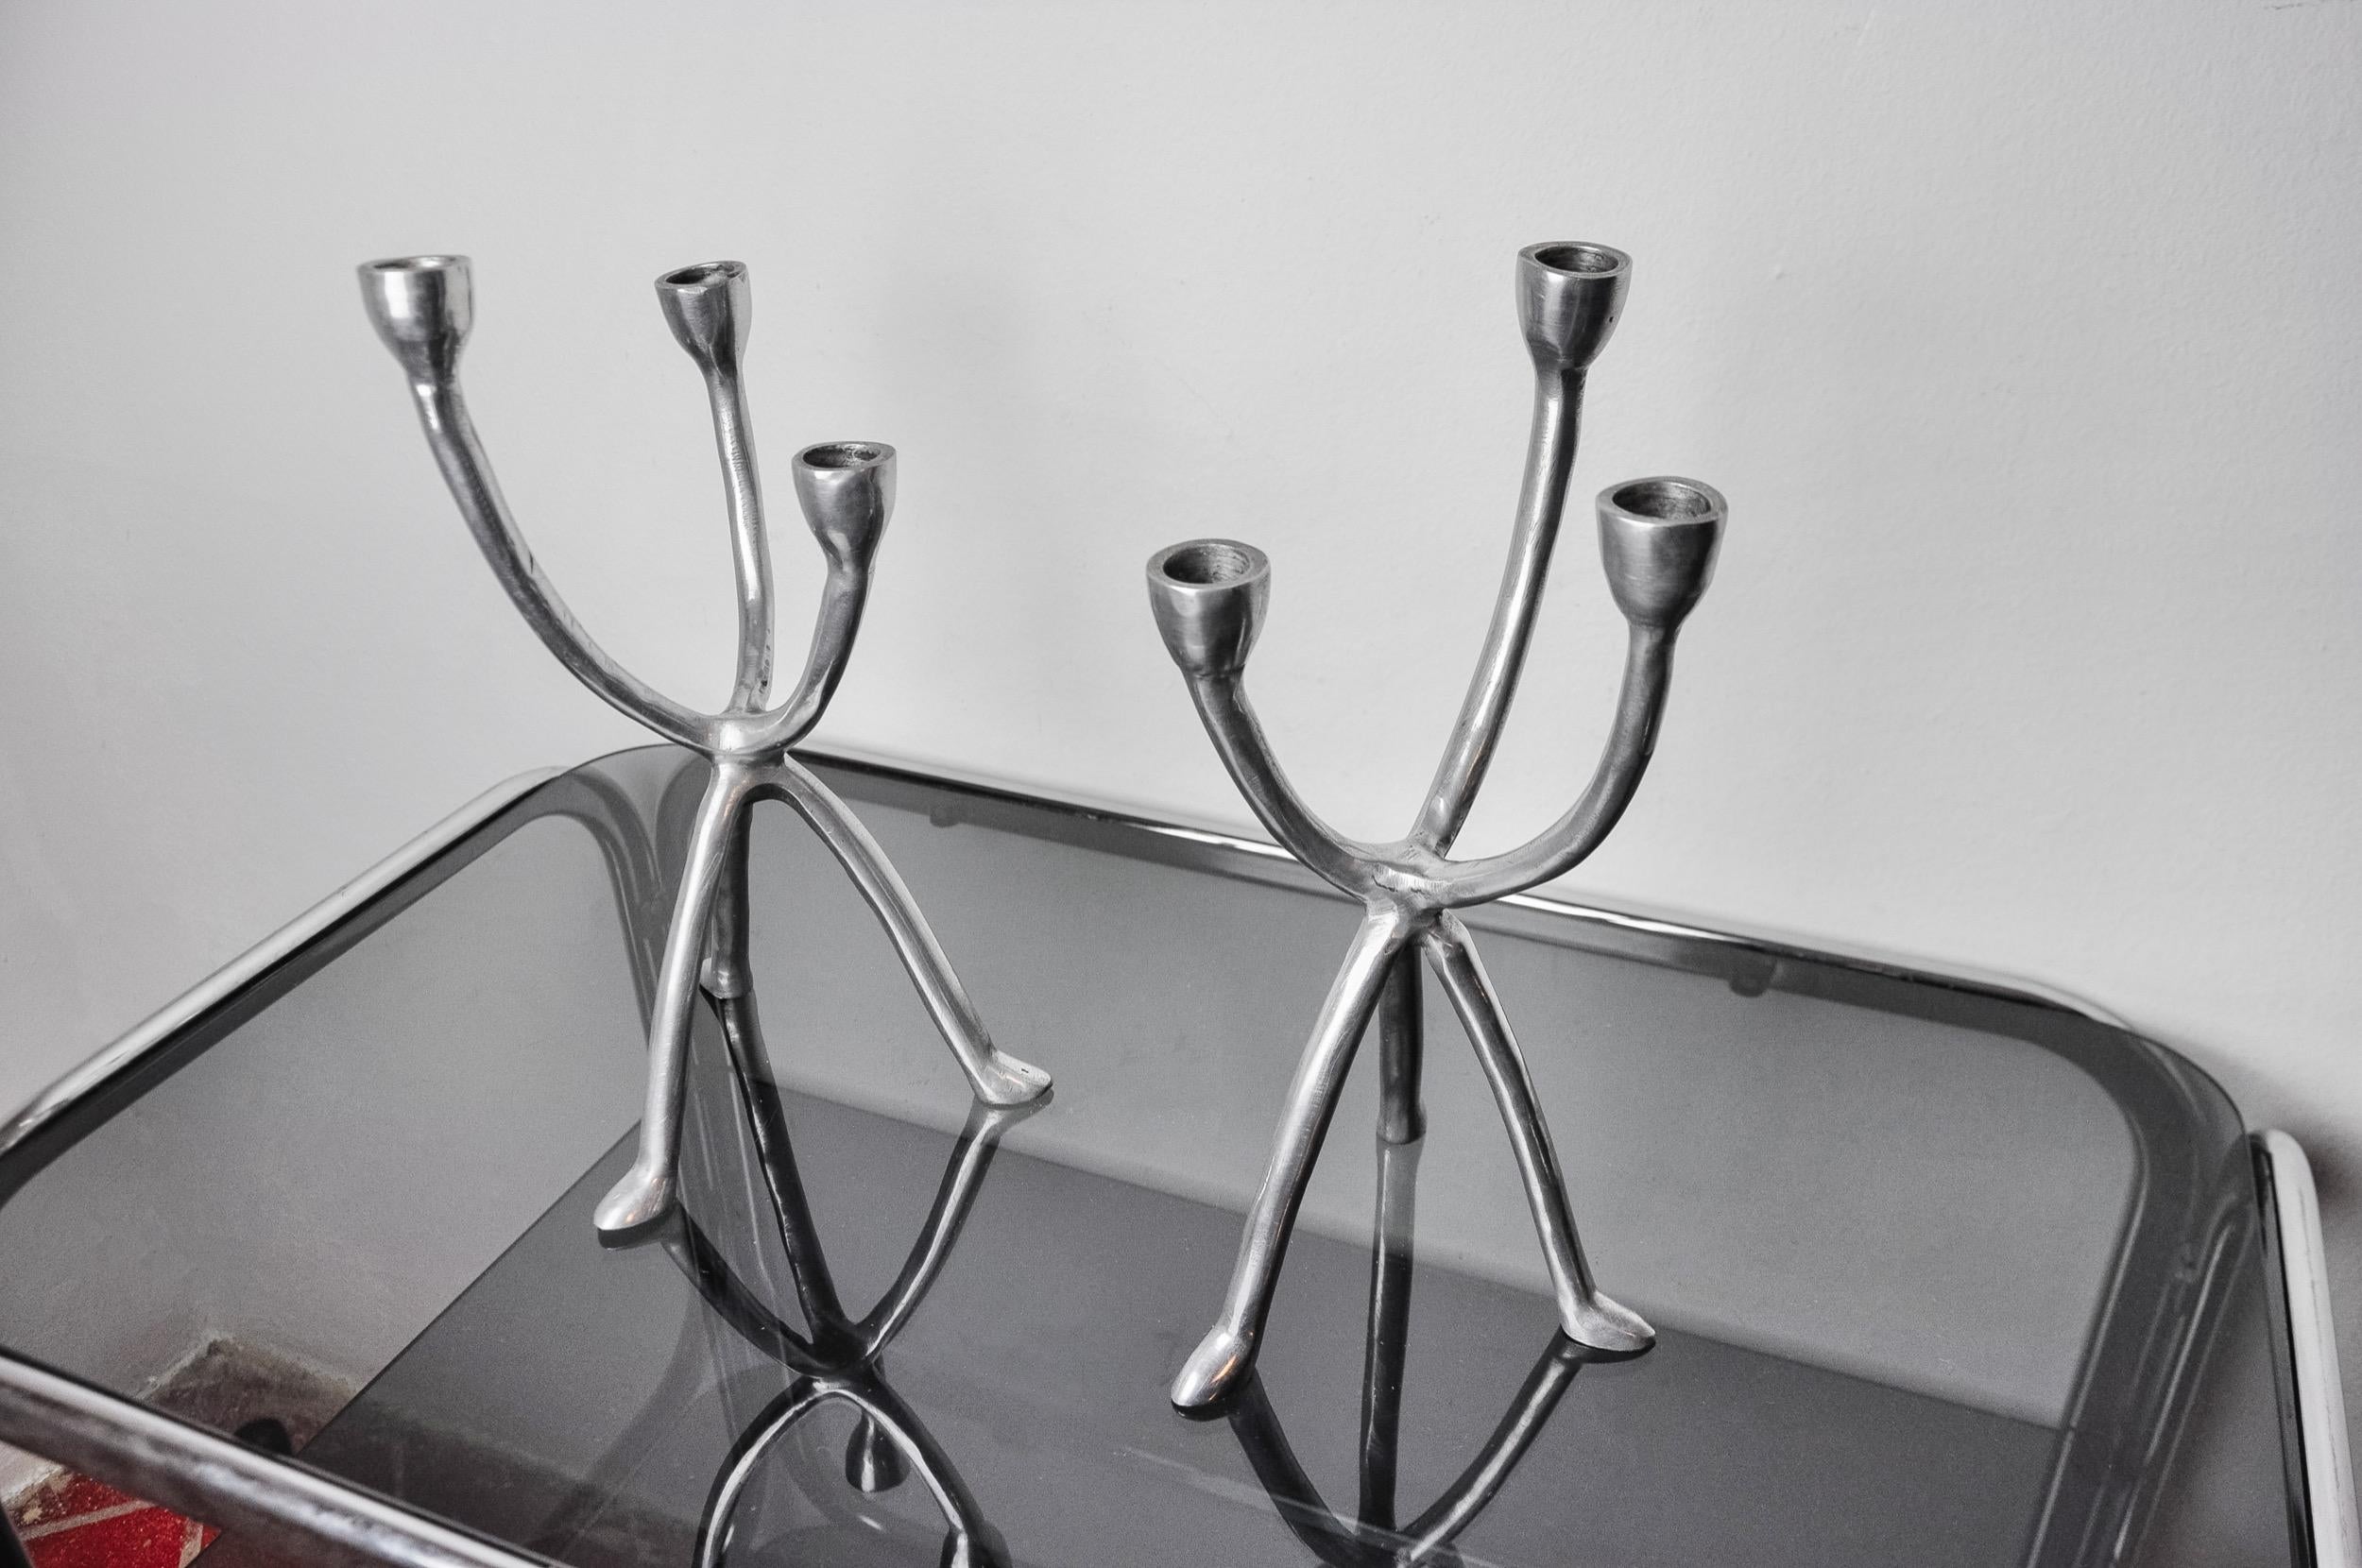 Late 20th Century Pair of Brutalist Candlesticks 3 Arms, Denmark, 1970 For Sale